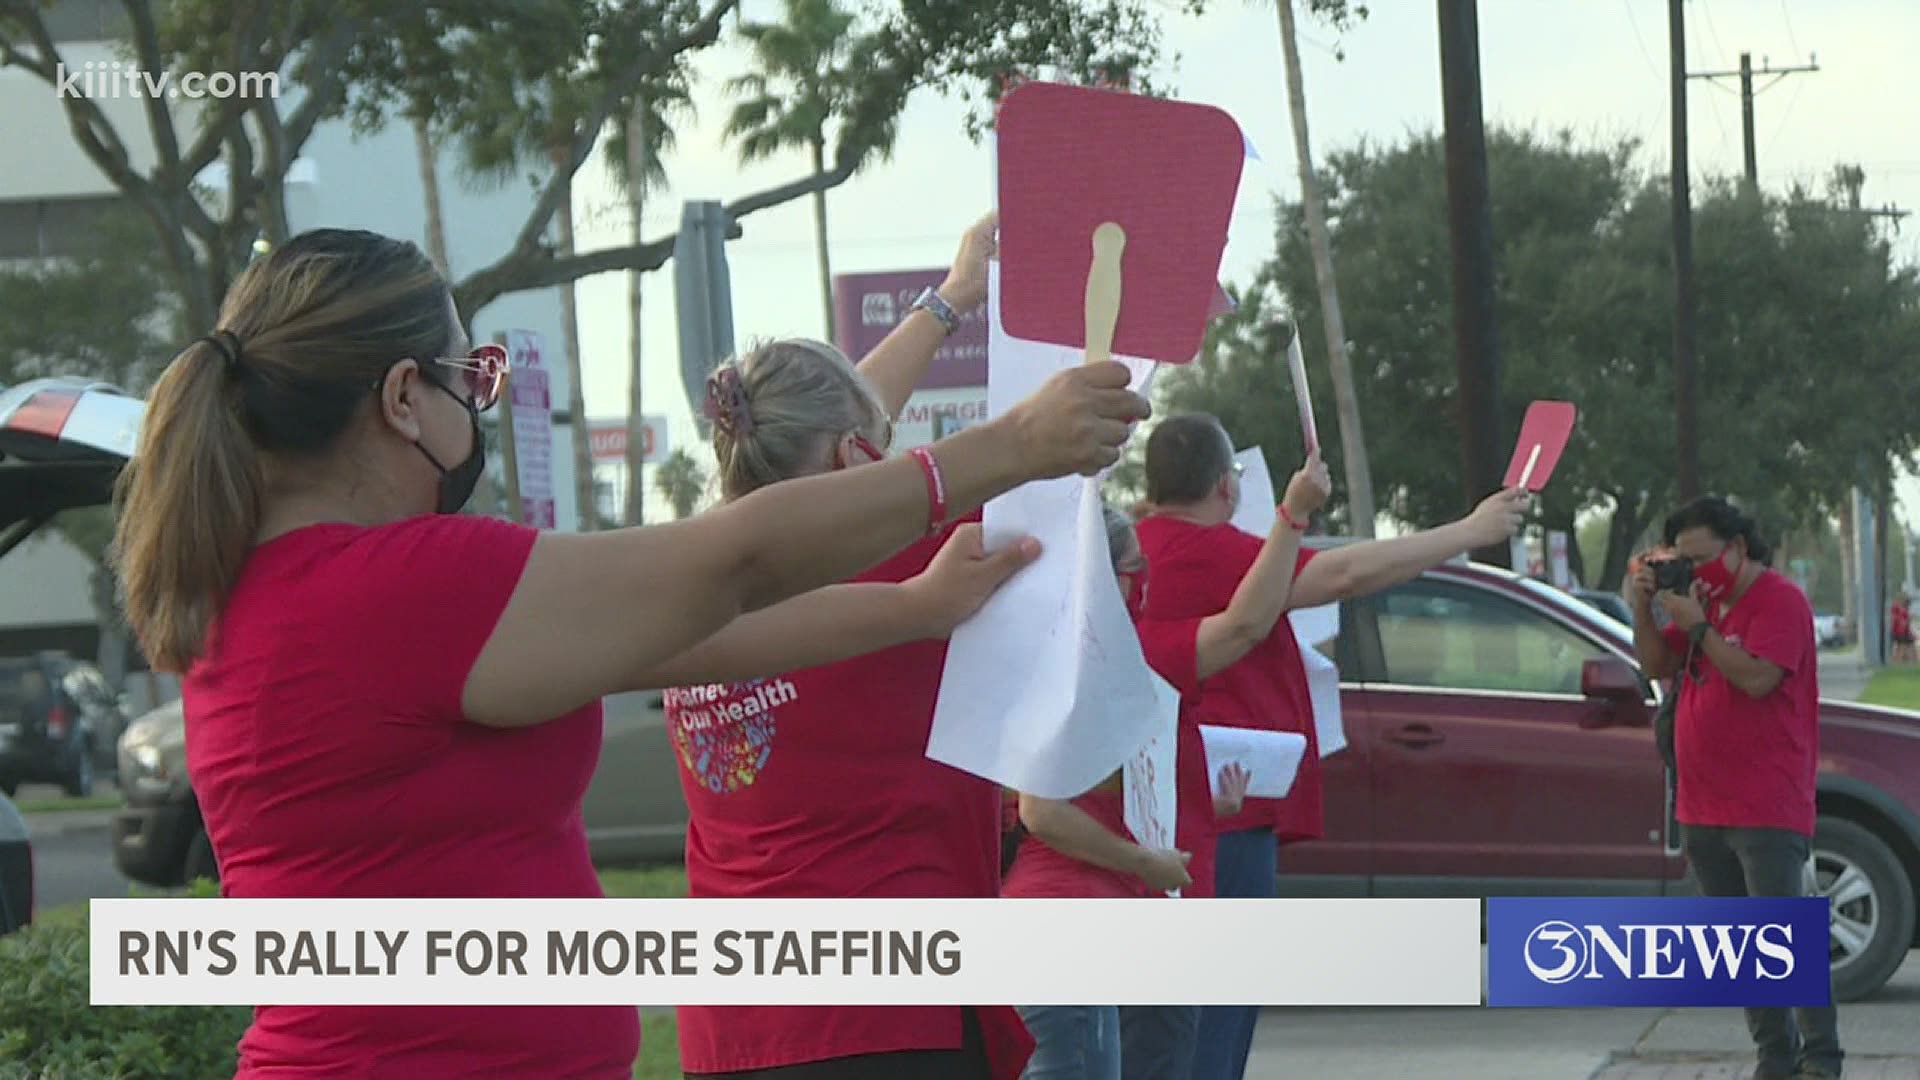 The group tells 3News, that the hospital is imposing a new staffing pattern that would increase the nurse to patient ratio.